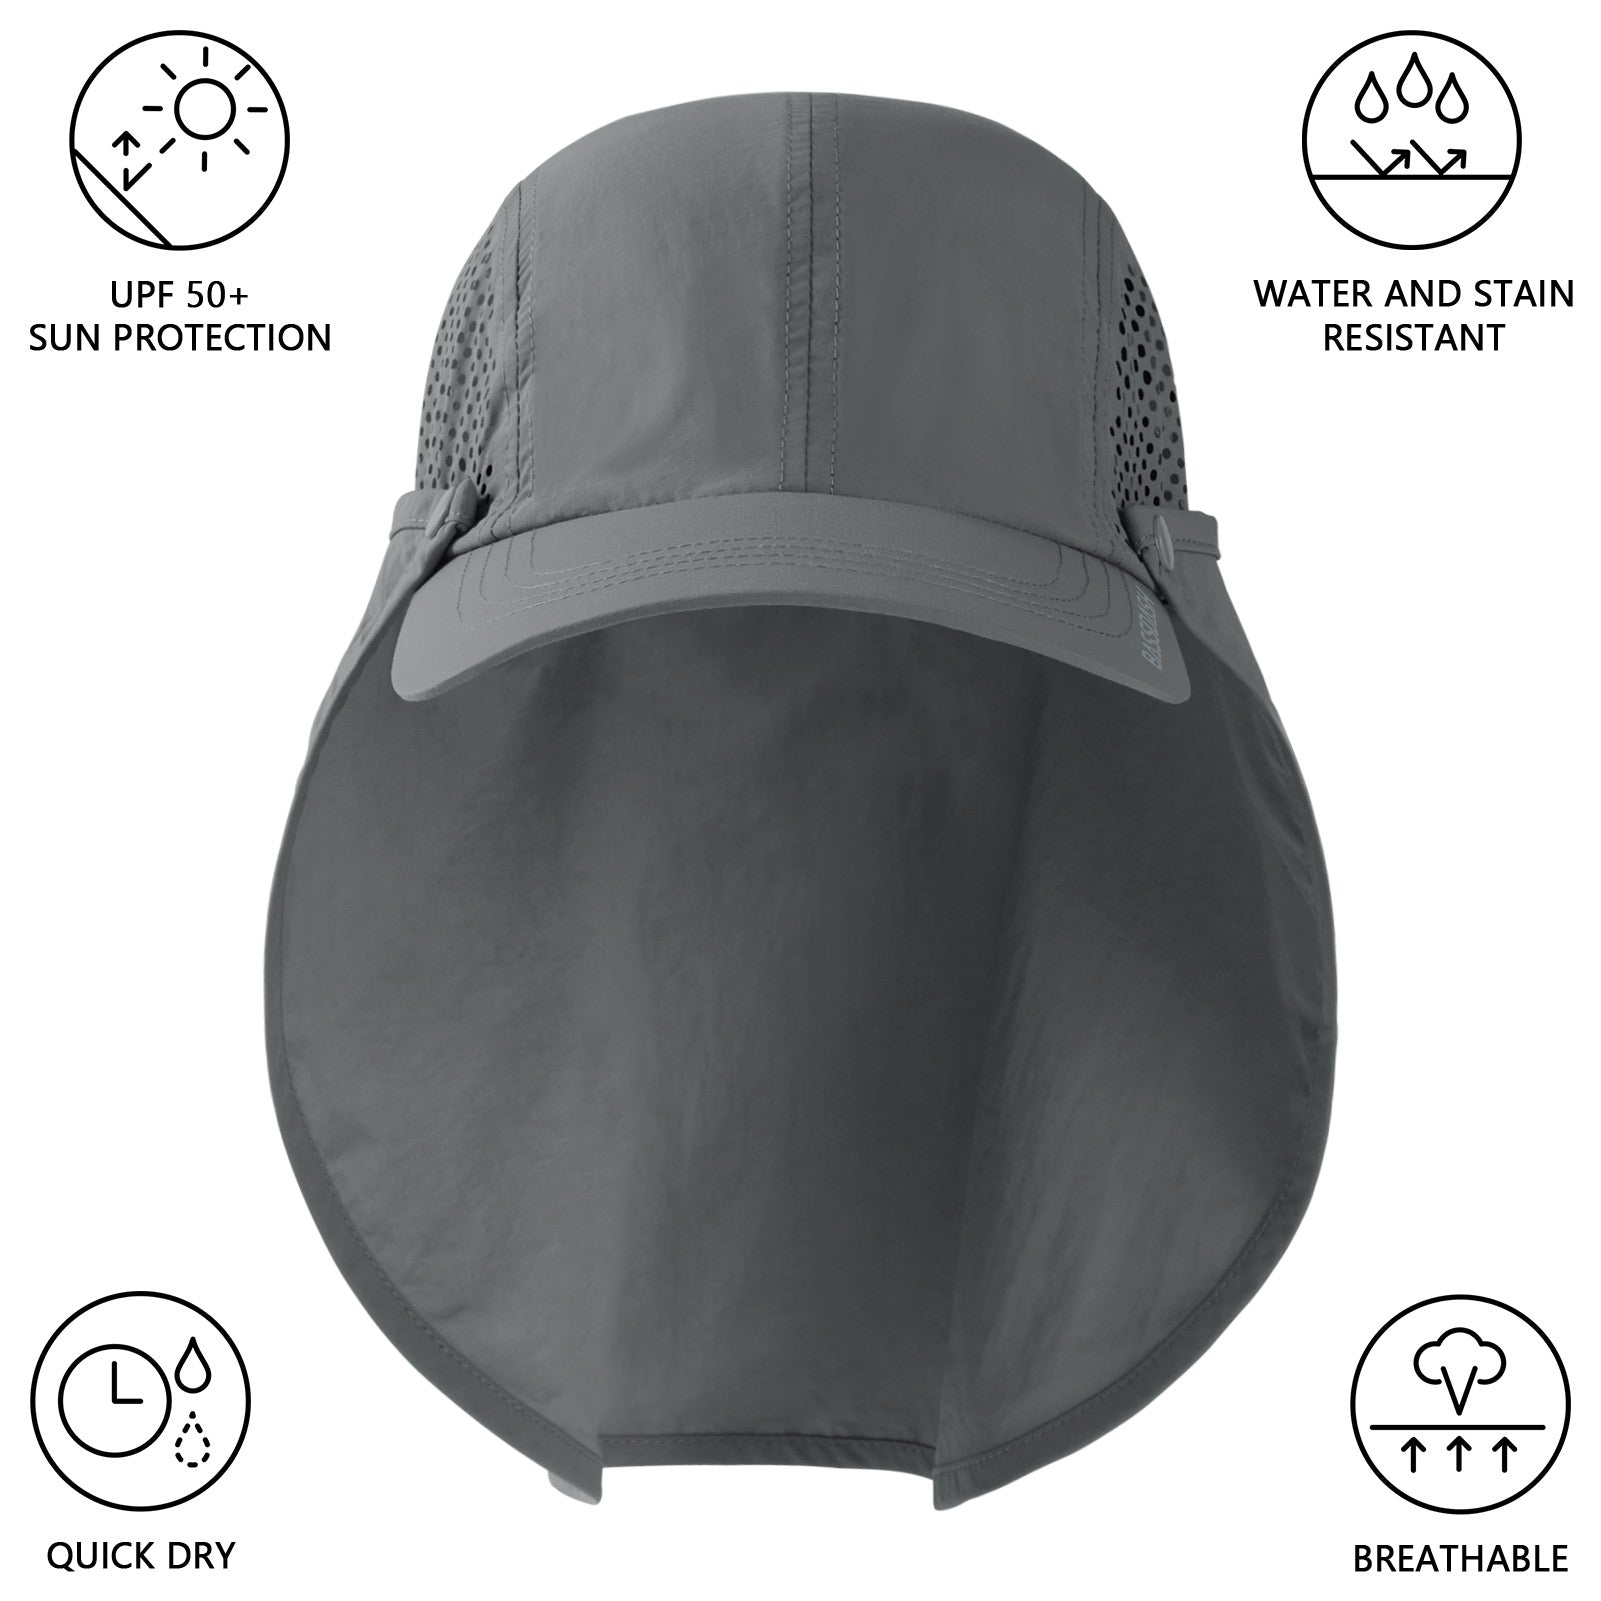 Unisex Sun Cap Fishing Hats, Outdoor 360° Sun Protection UPF 50+ Sun Caps,  Removable Neck Face Flap Cover Caps, Quick Dry Baseball Hat for Man Women